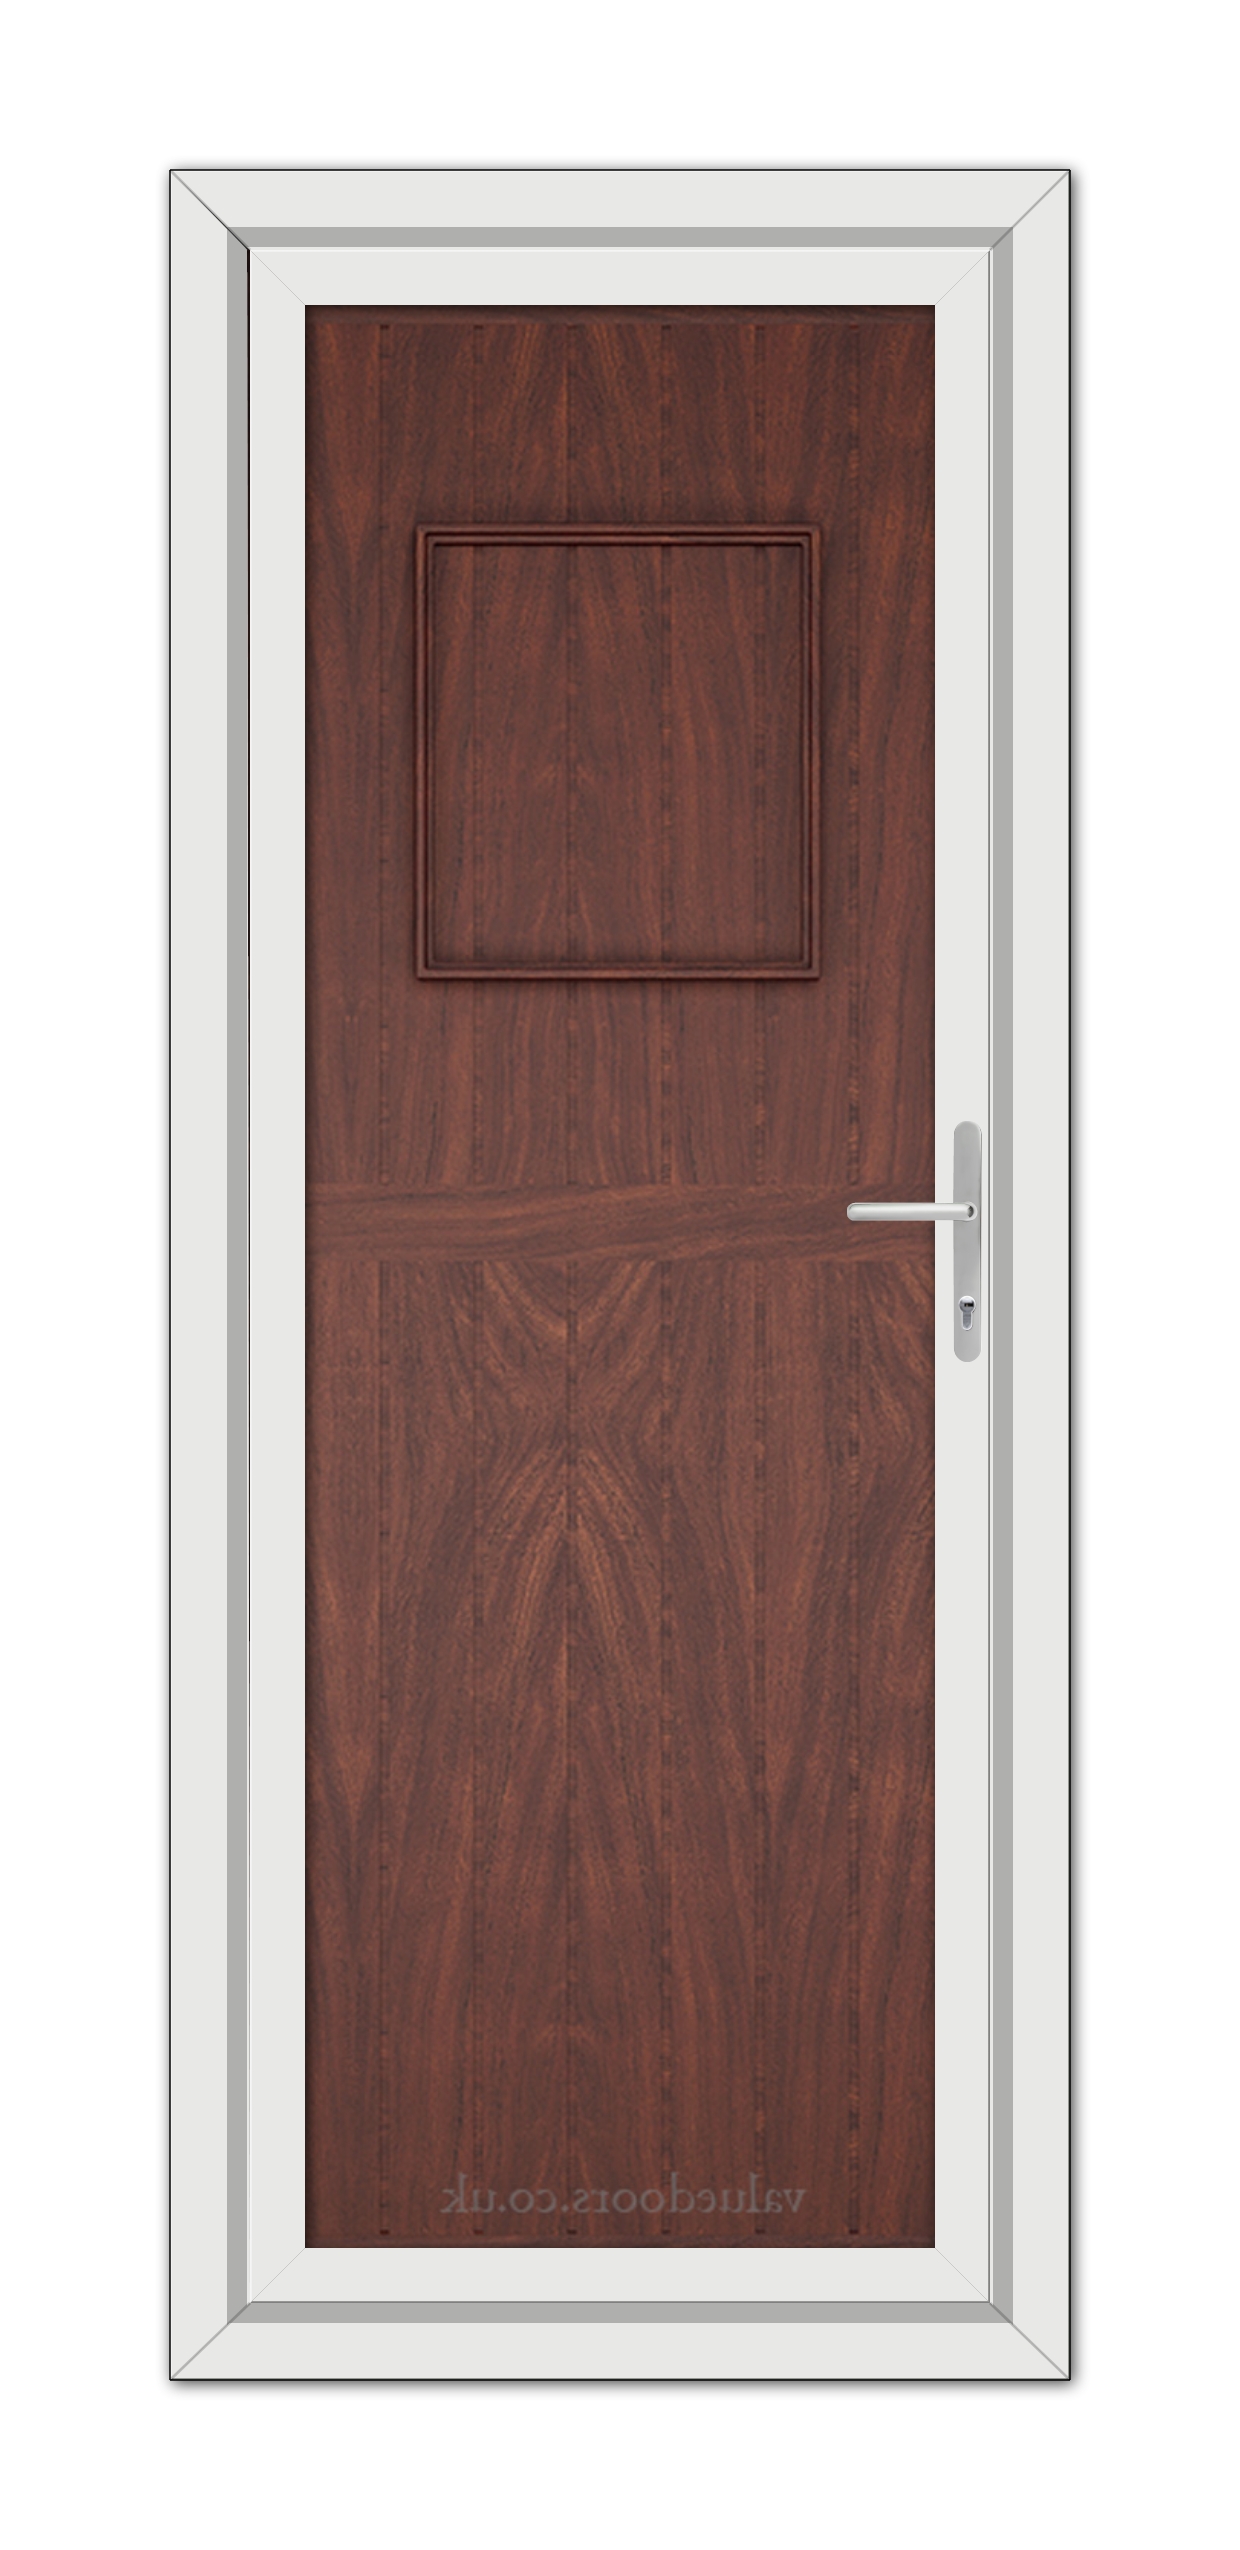 A modern Rosewood Chatsworth Solid uPVC Door with a centered square panel, framed in white, featuring a metal handle on the right side.